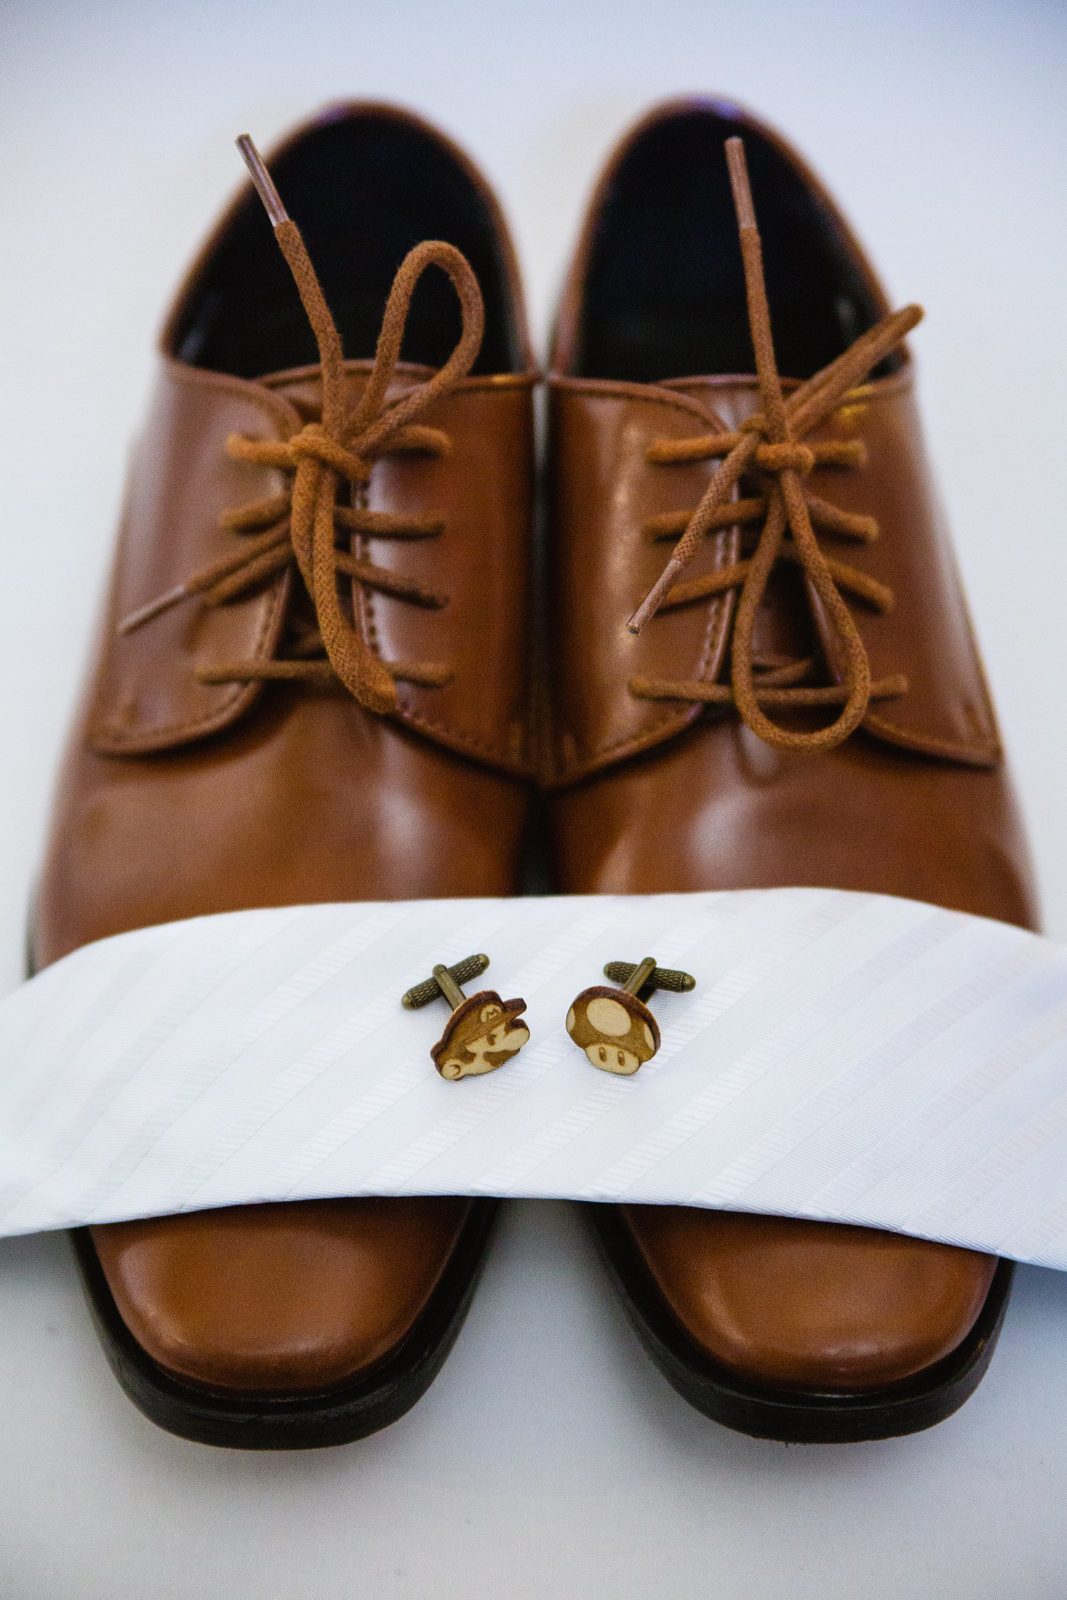 Groom's wedding day details of tan shoes, white tie, and wooden Mario Bros cuff links by PMA Photography.